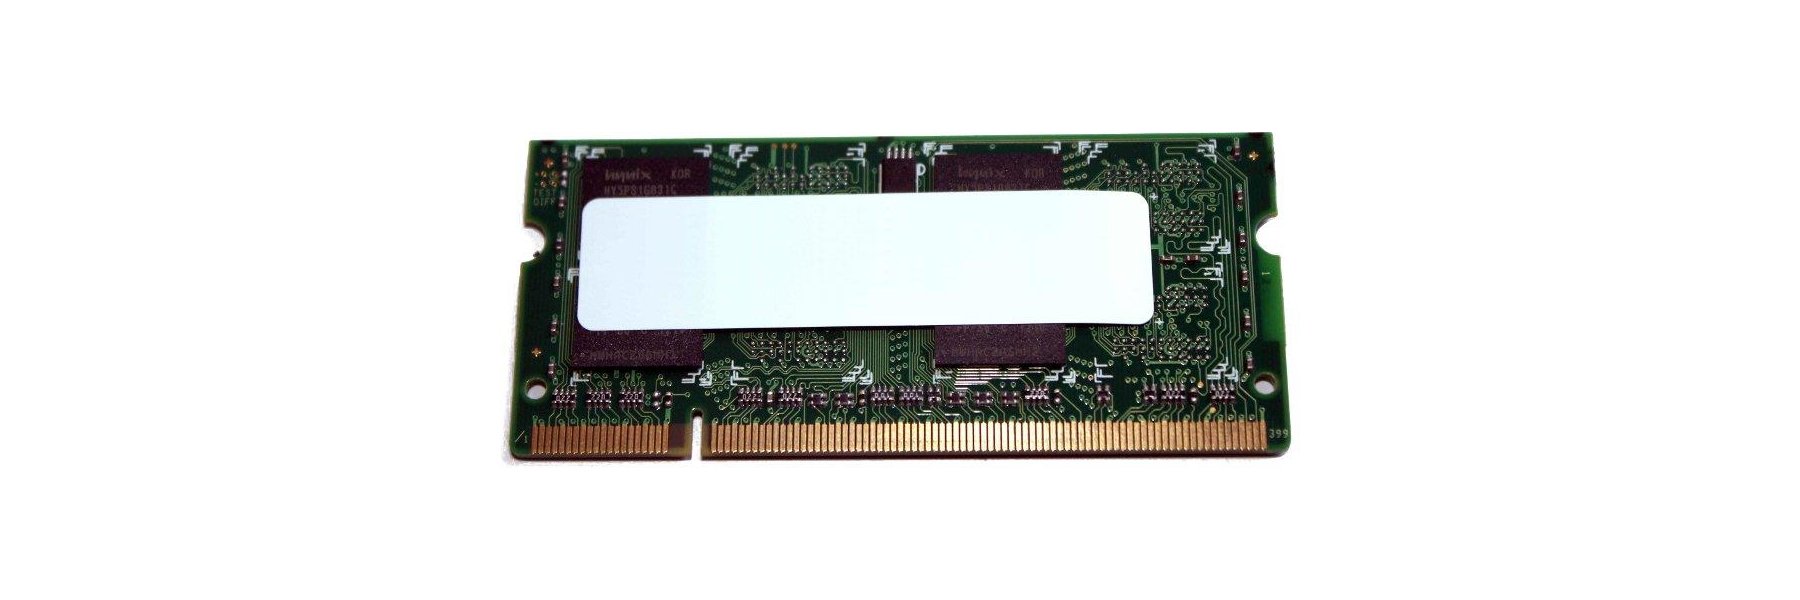 PC2-5300S / SO-DIMM